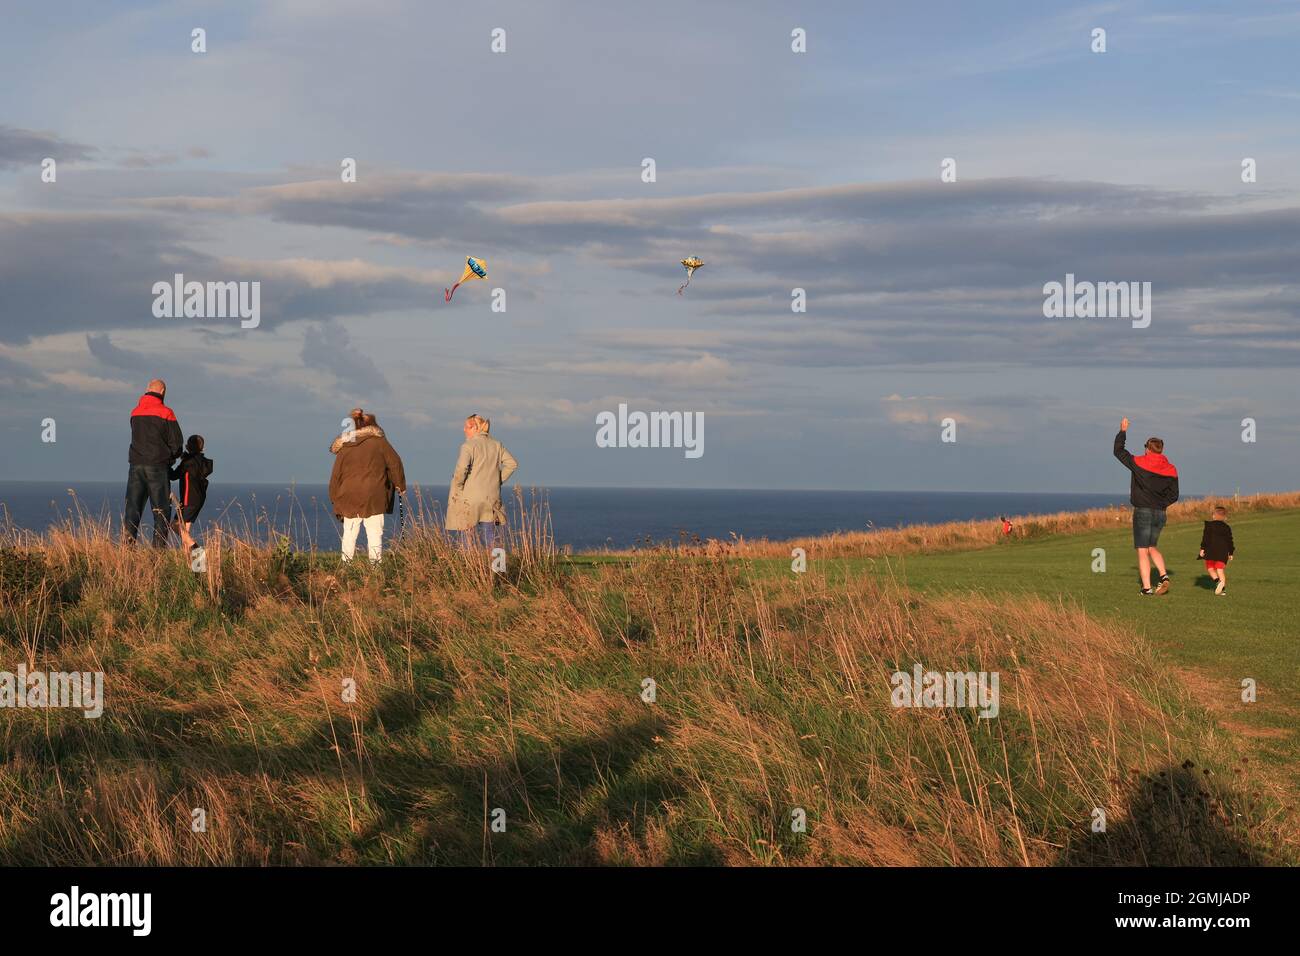 Man and Boy flying a kite with family looking on Stock Photo